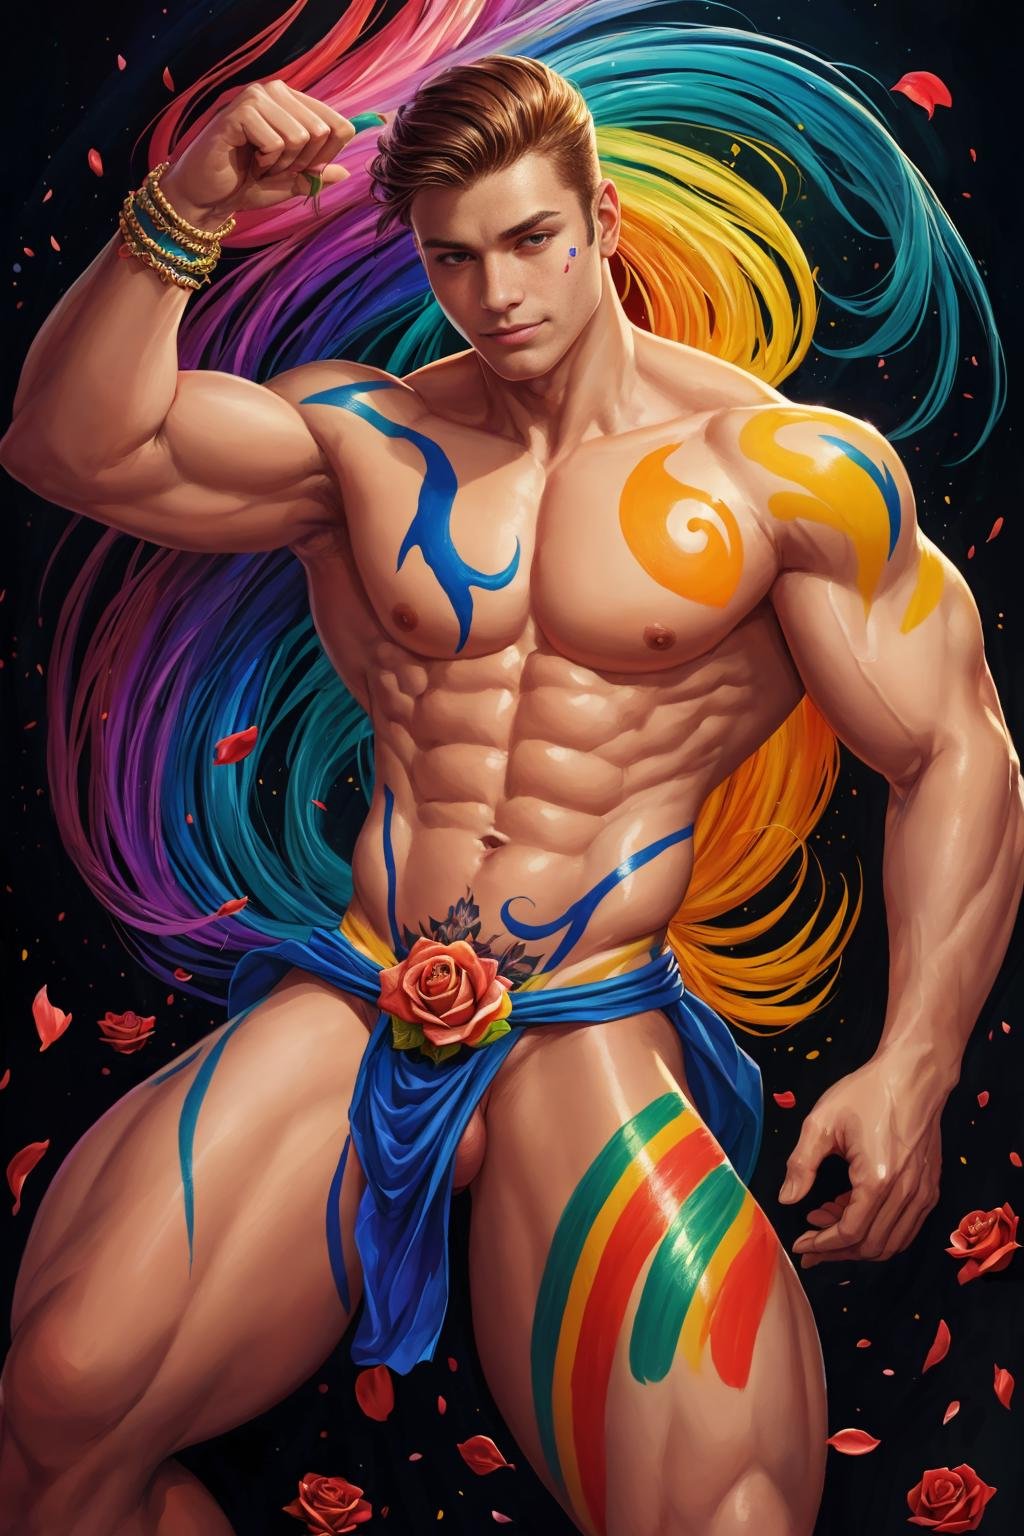 athletic man, wearing a fancy loincloth, colorful body paint, extremely detailed, detailed face, fractal art,colorful,highest detailed, (dynamic pose), (beautiful flowing rainbow rose petals), fractals, abstract background,shiny skin, colorful, flowers, acid colors, illustration, oil painting